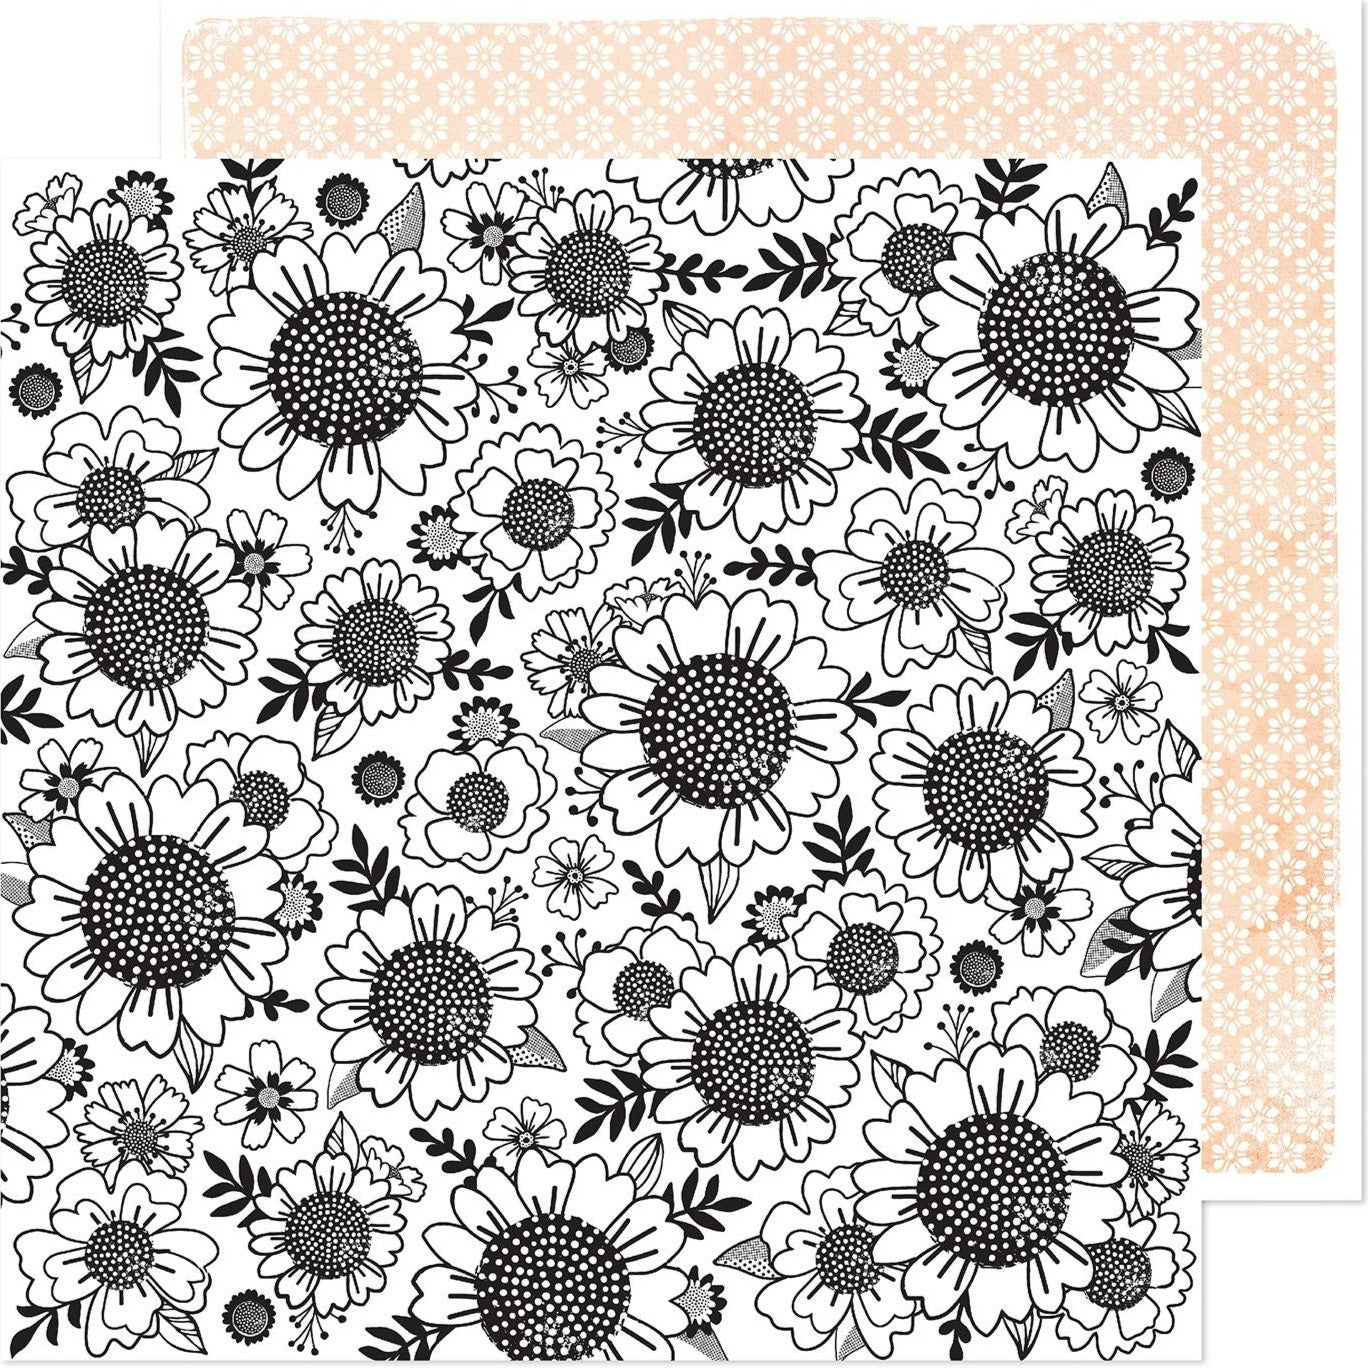 (Side A - black outlines of flowers on a white background, Side B - rows of cute little floral patterns on a peach background)